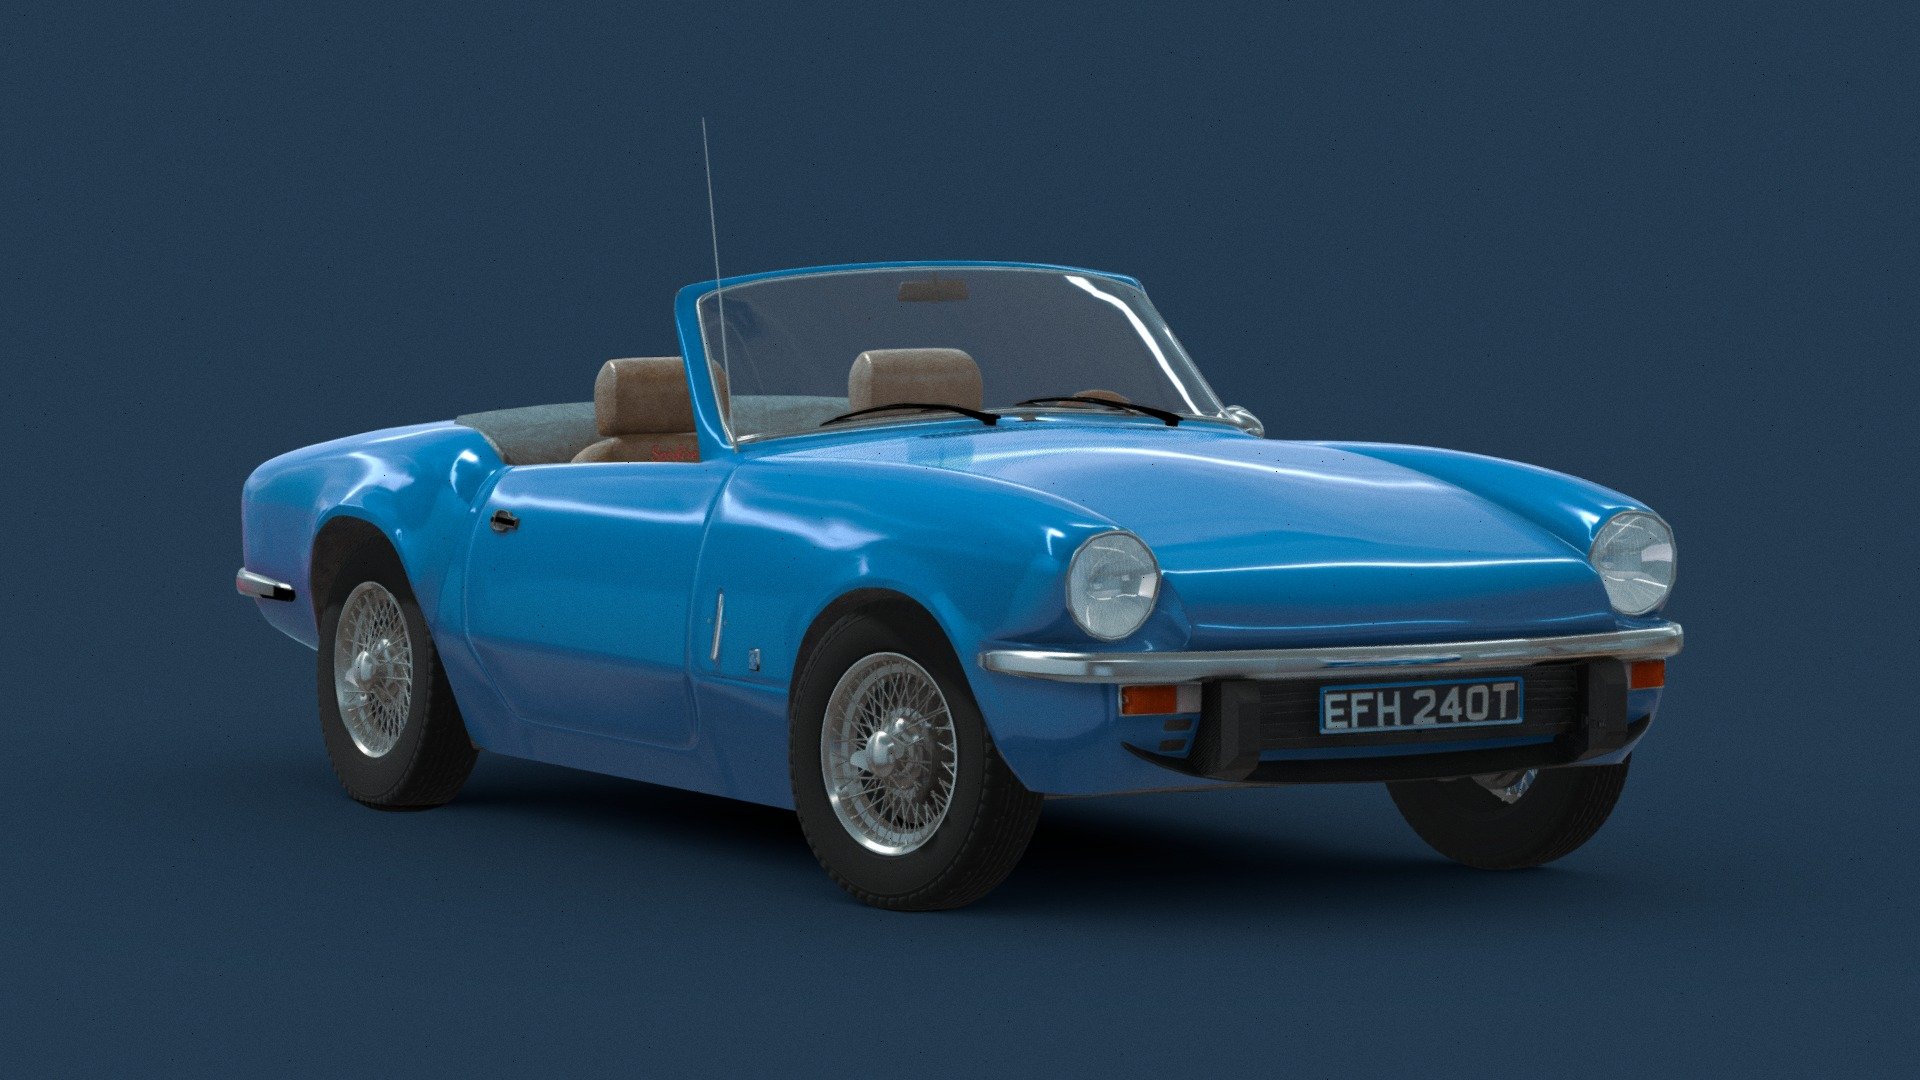 The Triumph Spitfire is an iconic British sports car and a great classic car. That is mostly thanks to its name, with the car named after Britain's World War II fighter aircraft, the Supermarine Spitfire. Powered by an inline 4 engine, this model is a 1972 spitfire with special addition seats 3d model